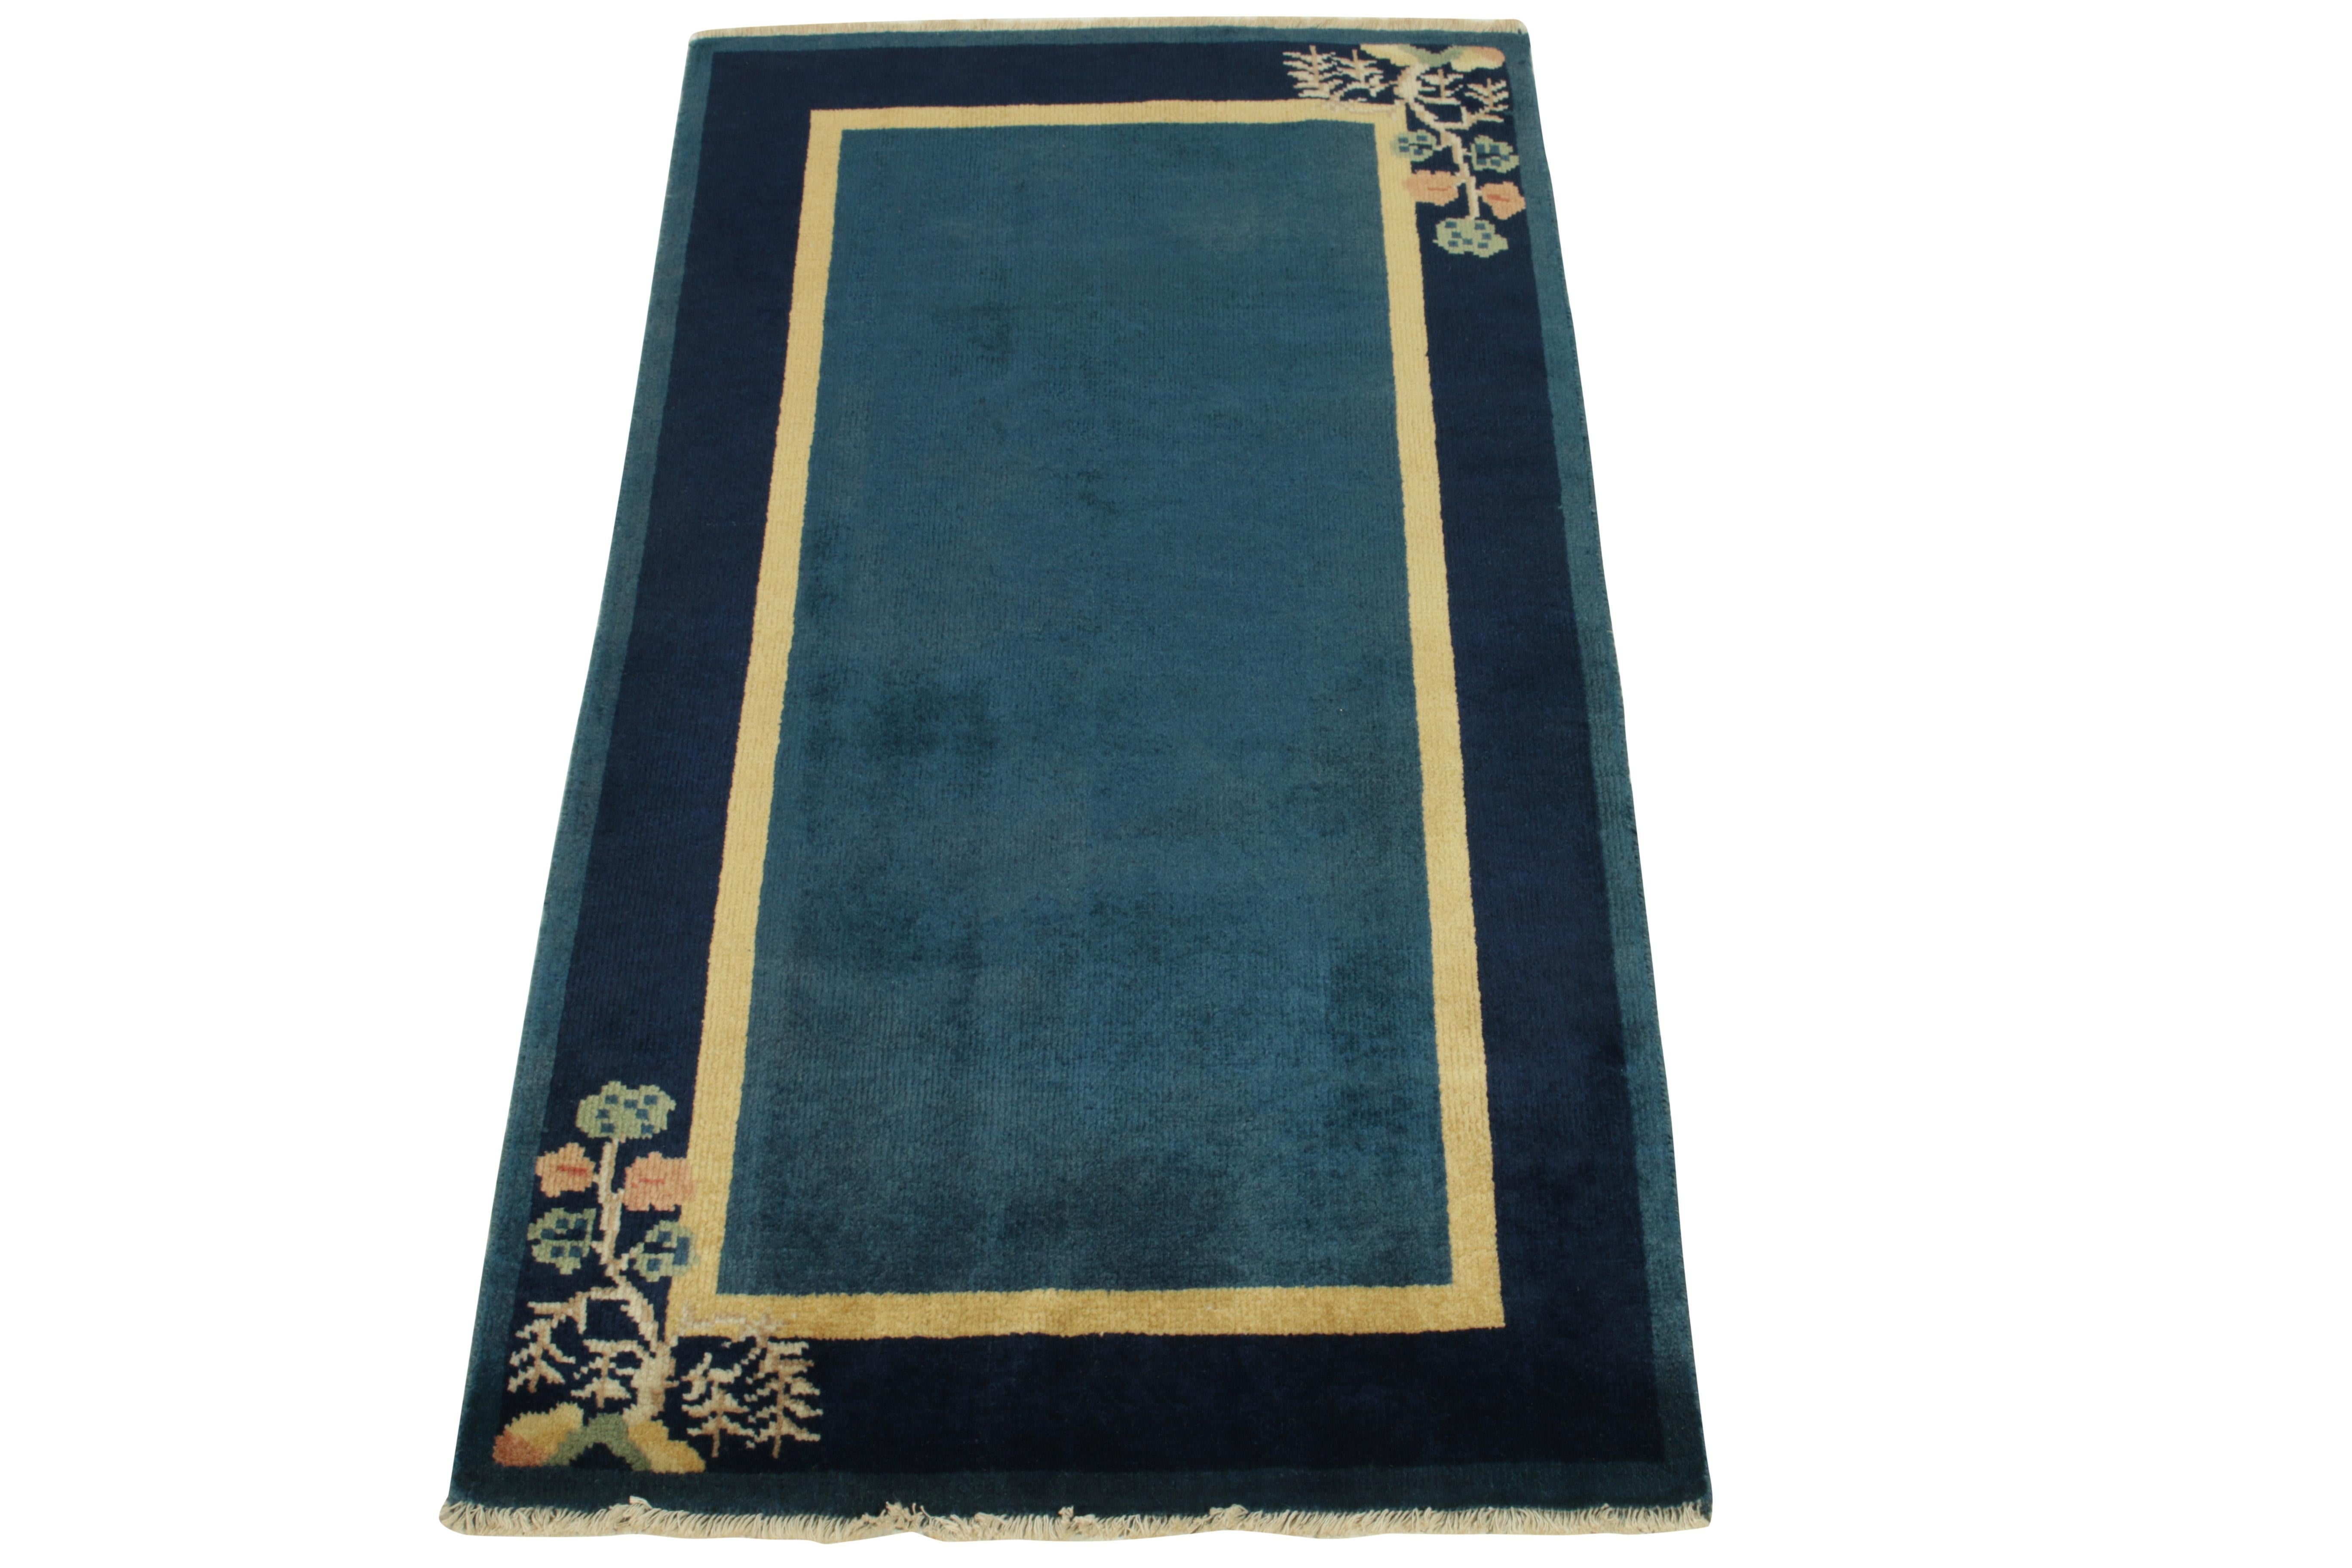 Drawing inspiration from Chinese Art Deco style of the 1920s, a vintage rug portraying an ornamental frame featuring tasteful floral patterns on a pair of corners in teal green, reddish orange & beige-brown hues—all complementing the duality of deep